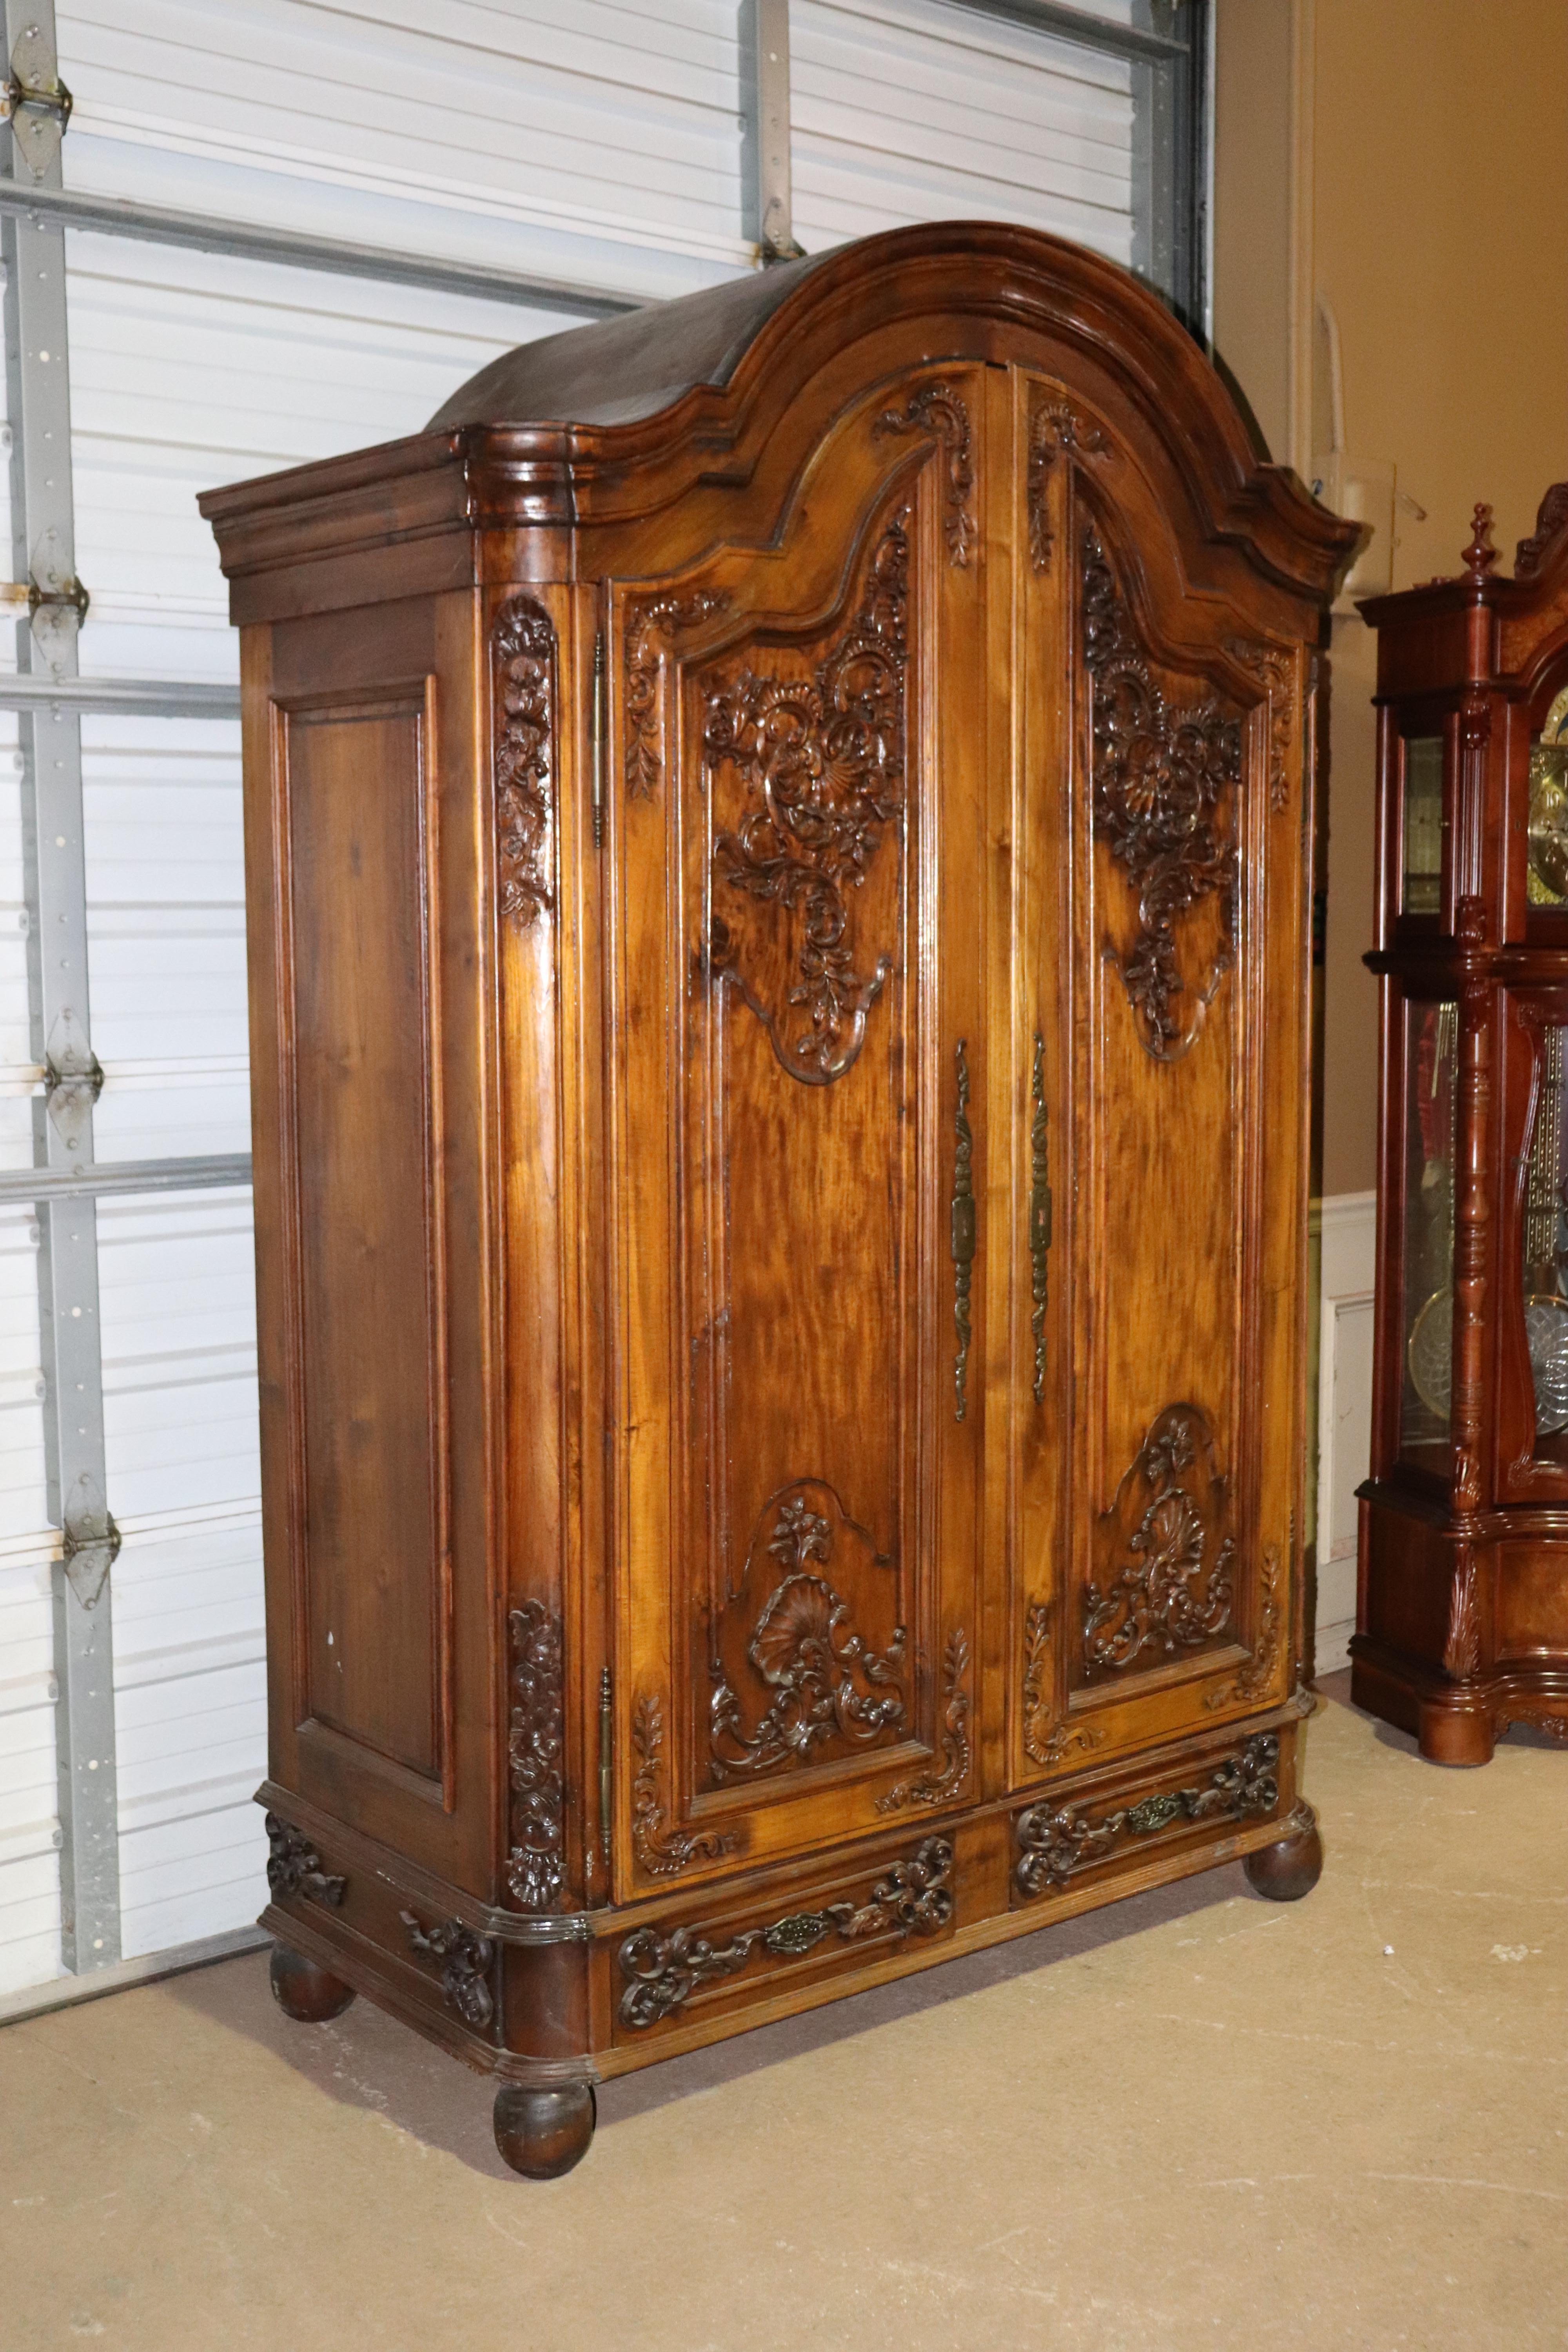 This is a custom made hand carved solid walnut armoire. Designed in the French country tradition this piece is designed to come apart and can be installed in any home, or apartment. It breaks down completely. The armoire is not very old, less than